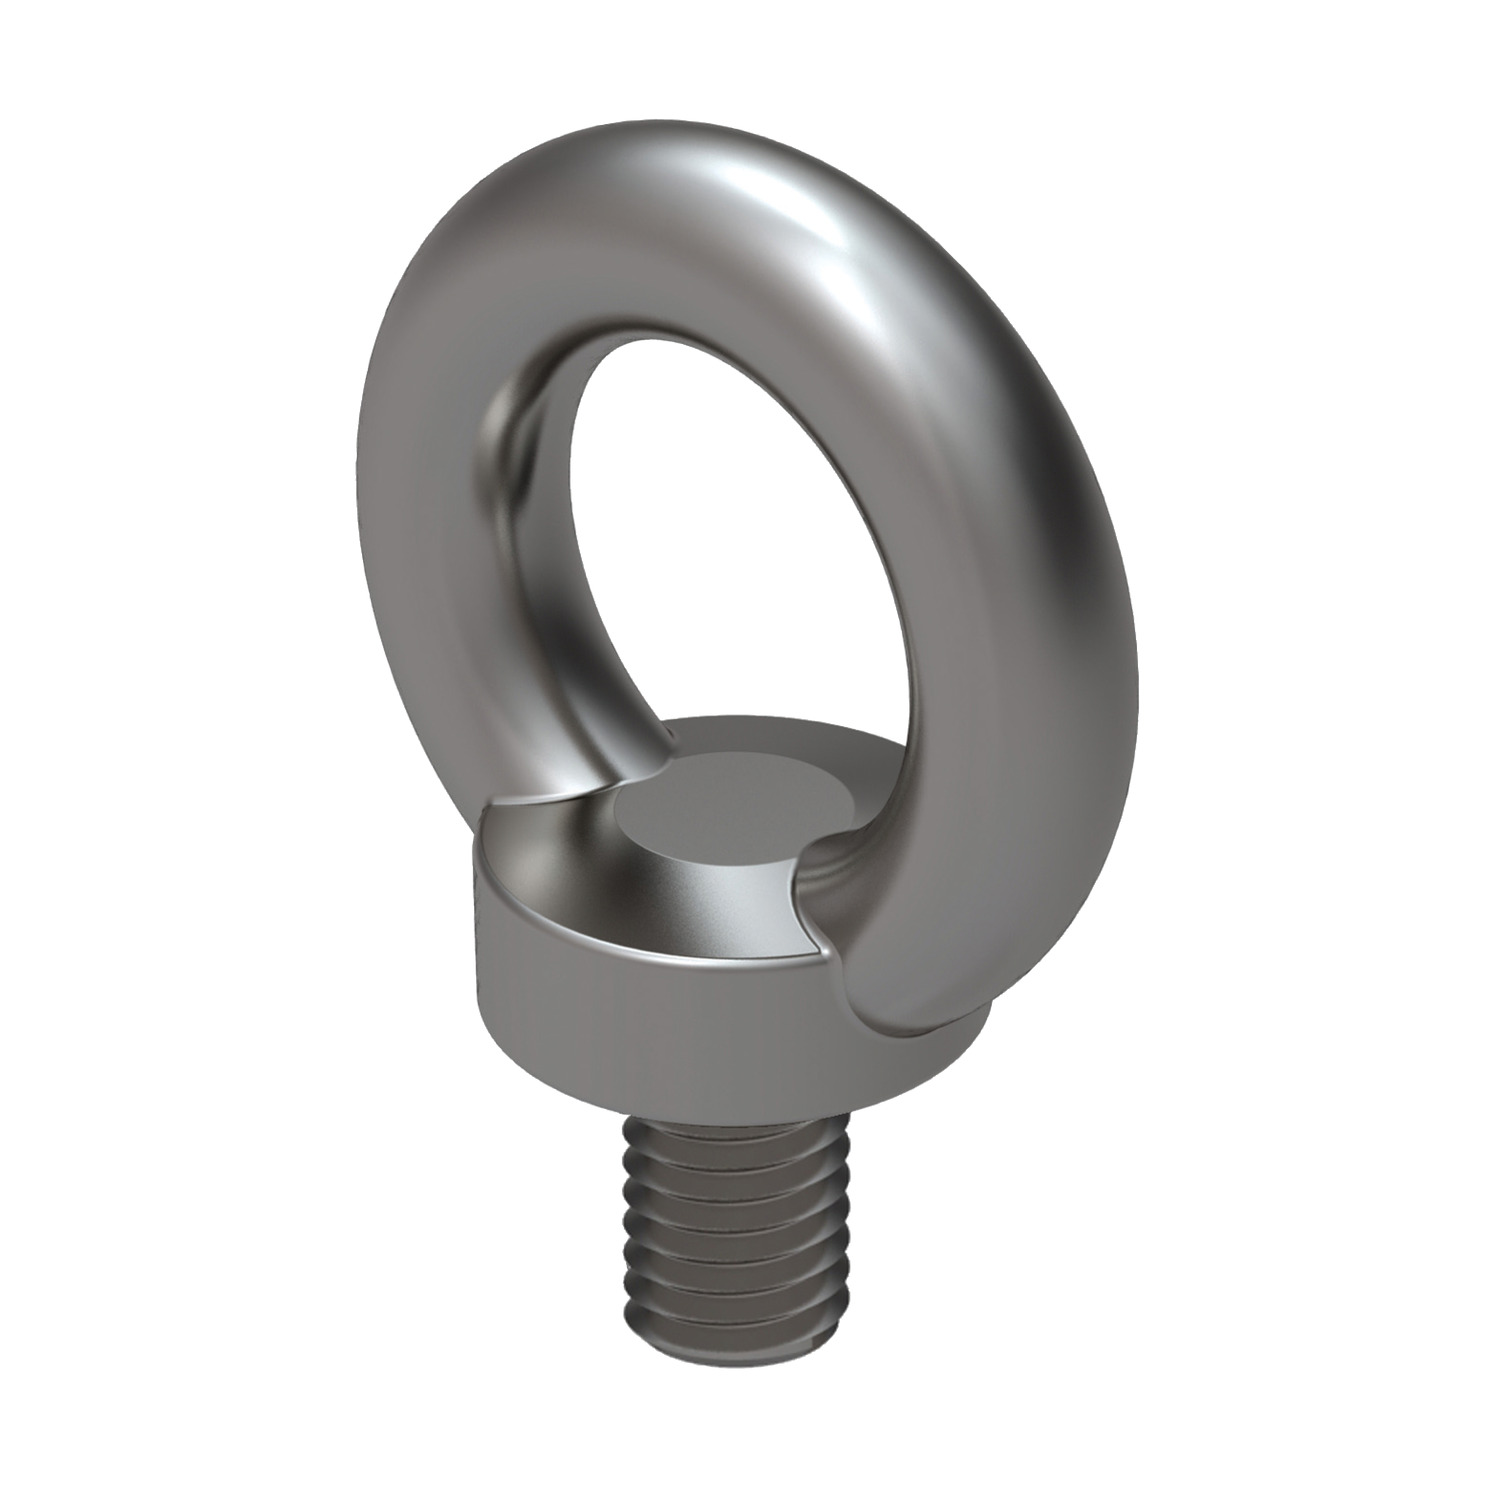 Steel Male Lifting Eye Bolts UNC thread male lifting bolt made from steel (C15) with hot dip galvanised zinc plating. Designed for use where the load is pulled in direct of the thread.